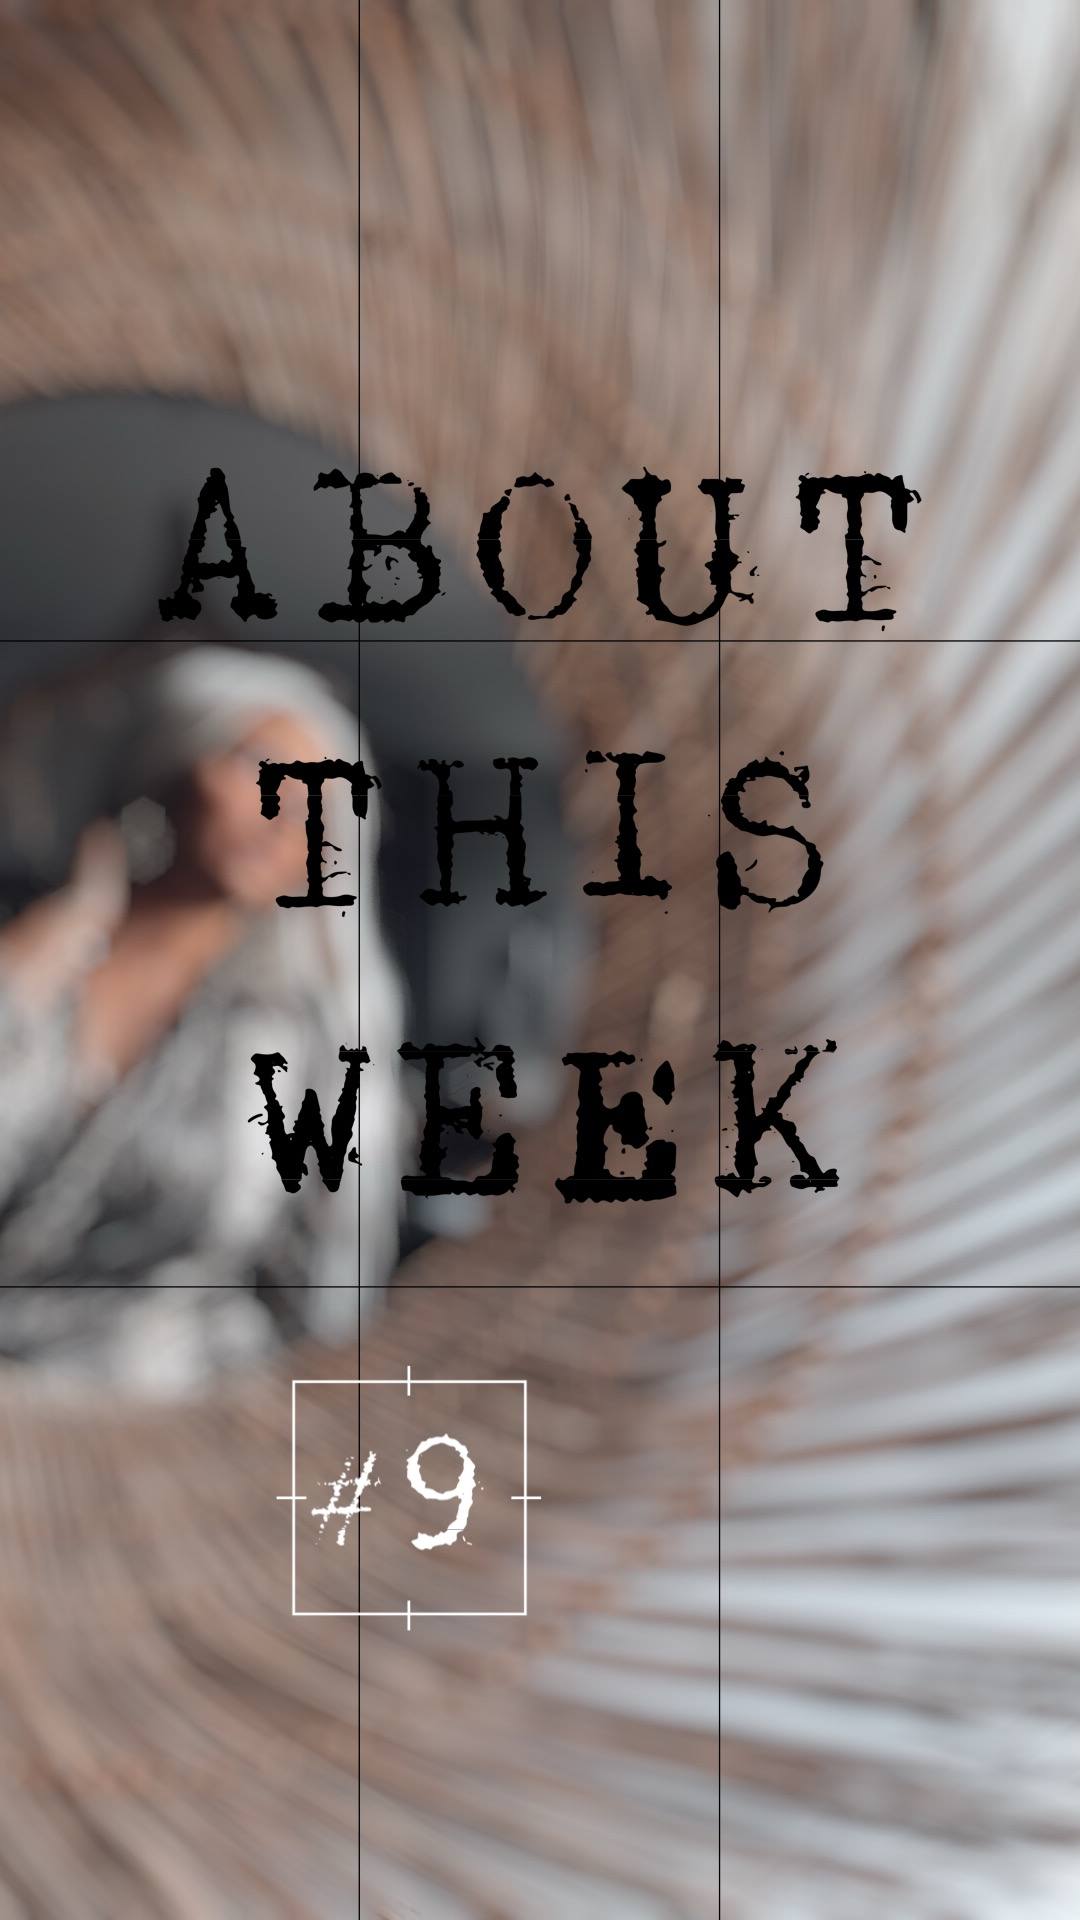 About this week #9